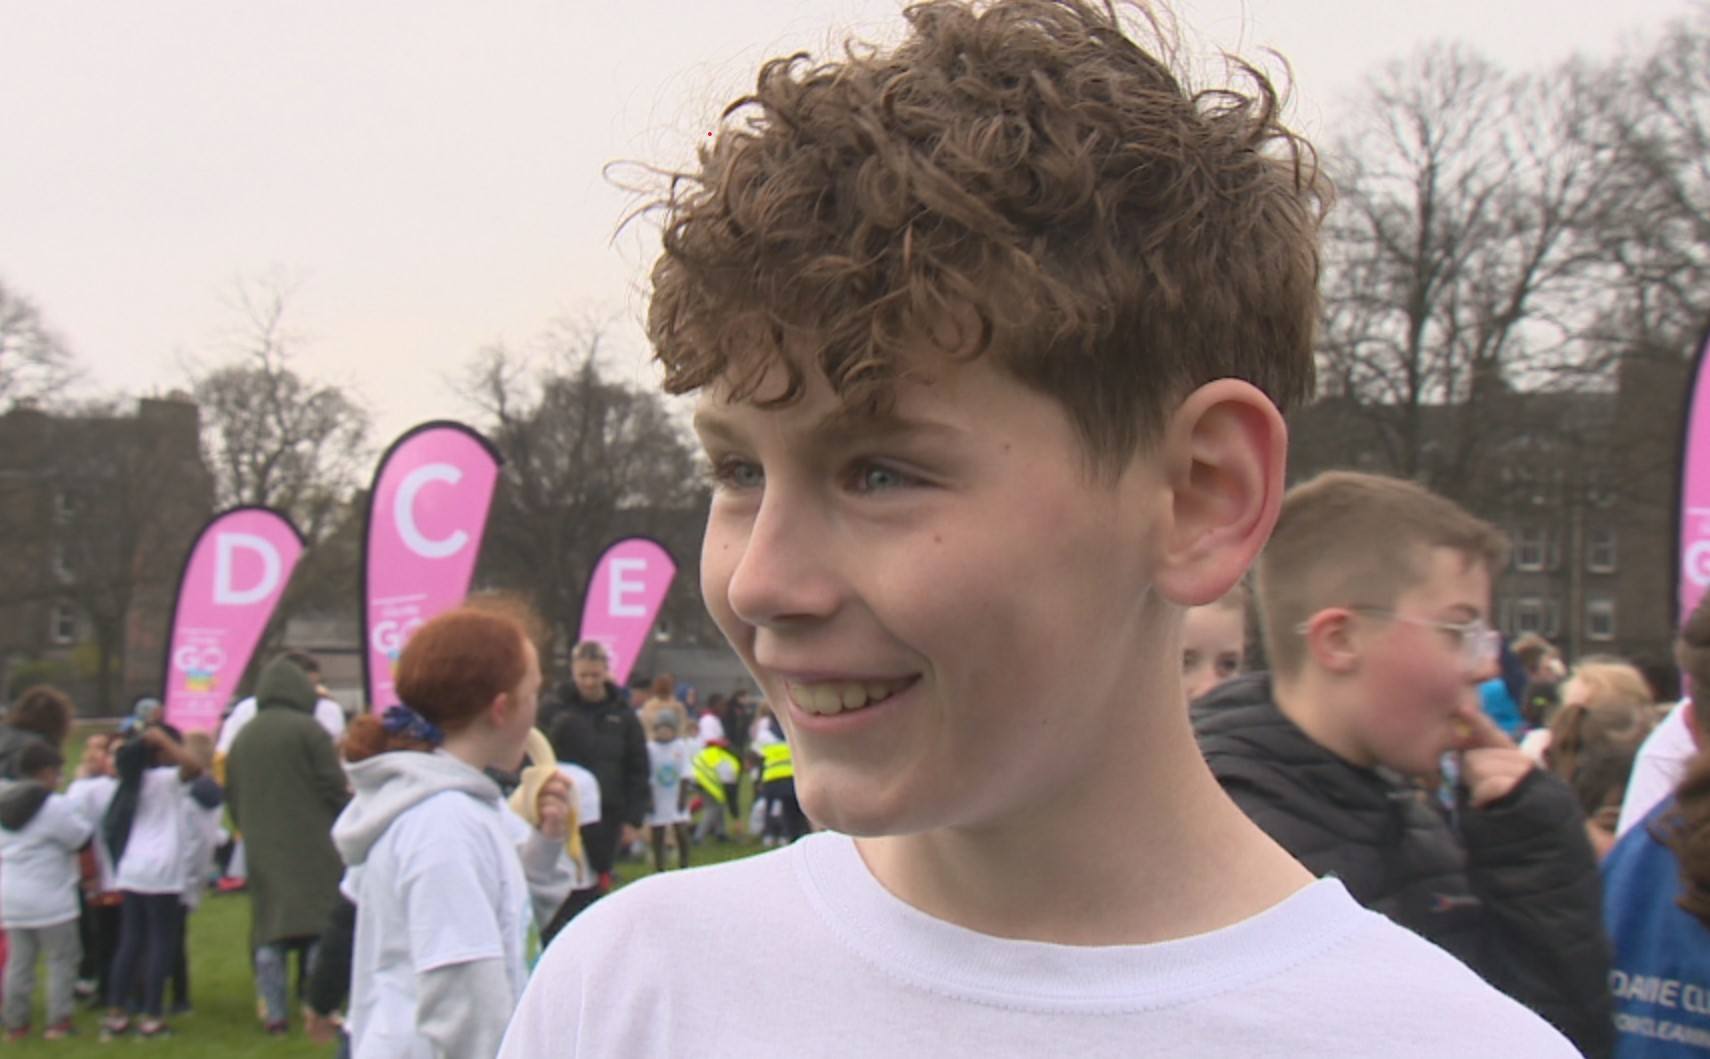 Eleven-year-old Lewis was the first across the finish line